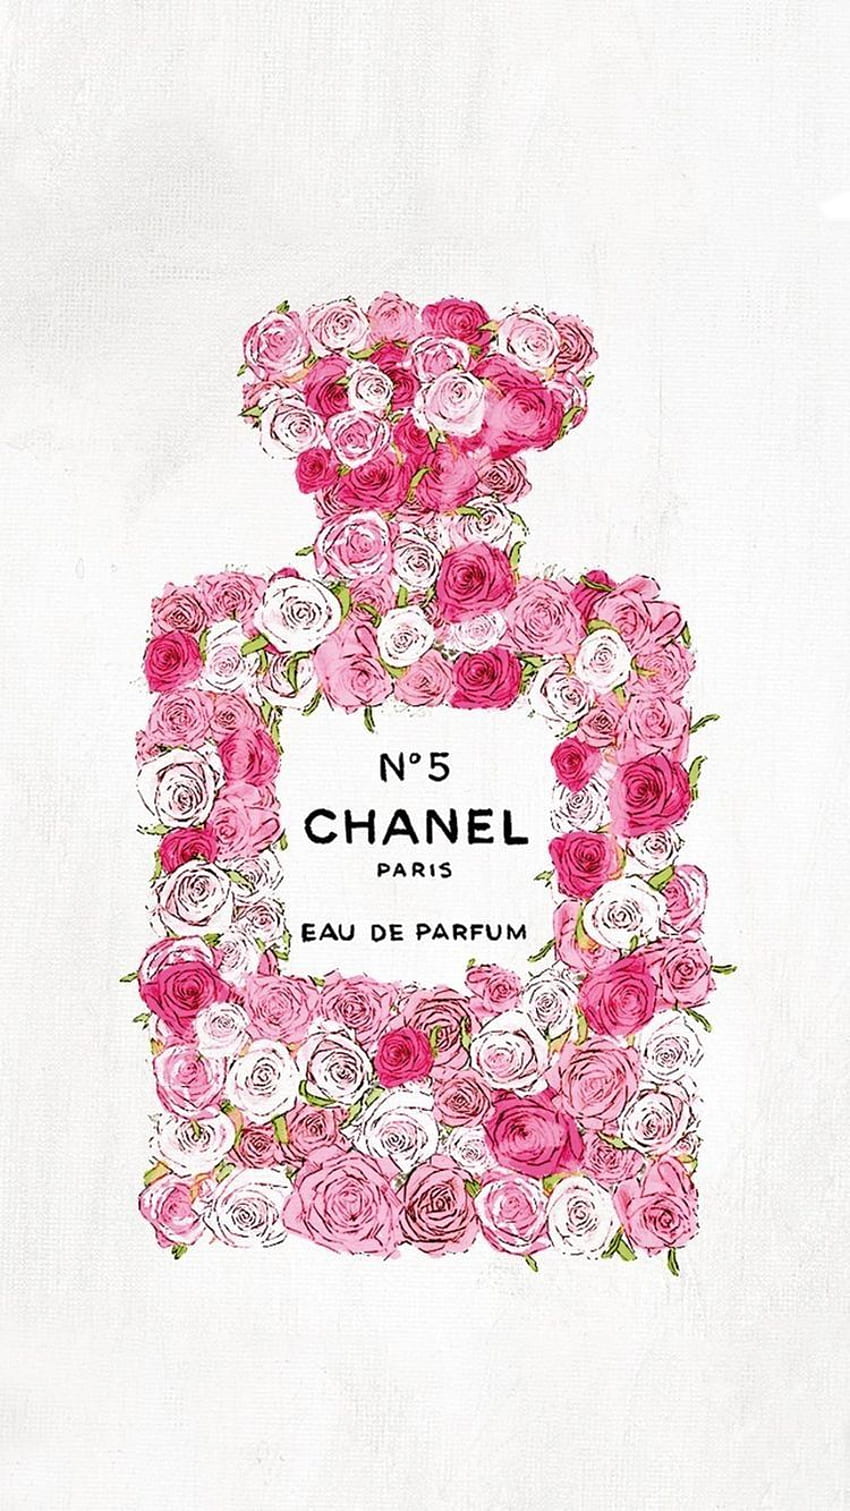 Chanel, Chanel print, Chanel wall art, Coco Chanel poster, Chanel